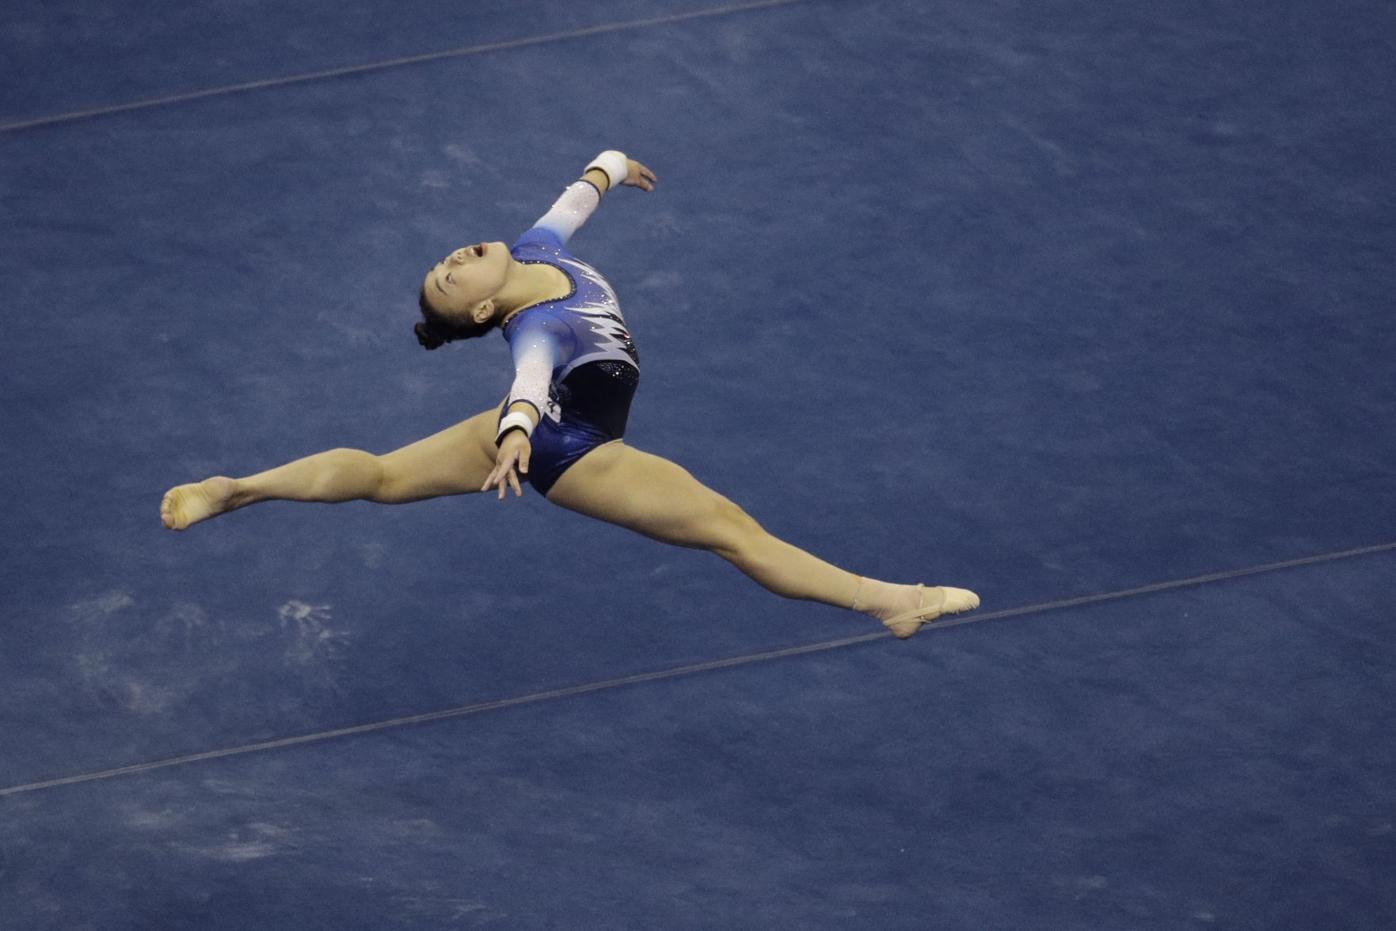 HOLD FOR MOVEMENT WITH STORY BY WILL GRAVES—Gymnastics coaches